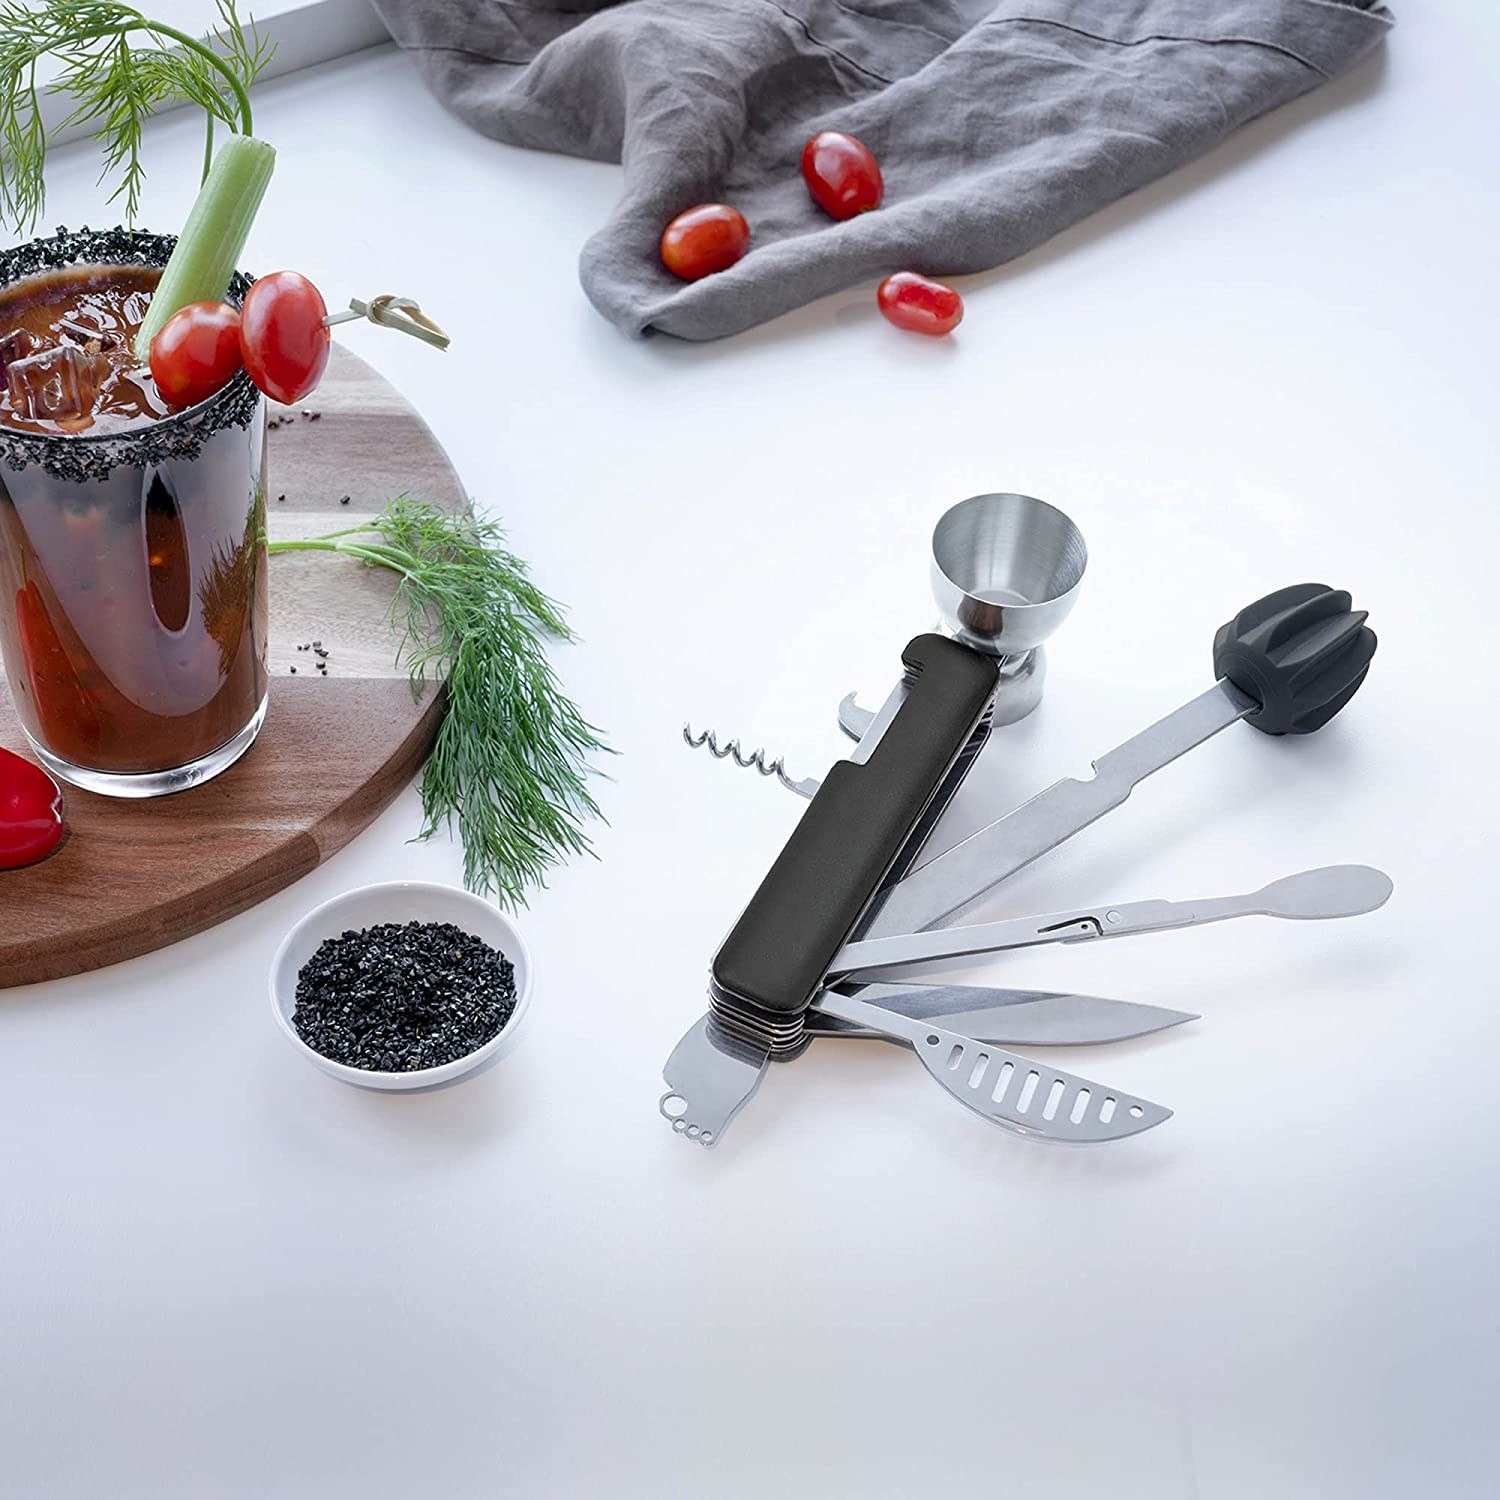 The black and stainless steel swiss army knife style tool